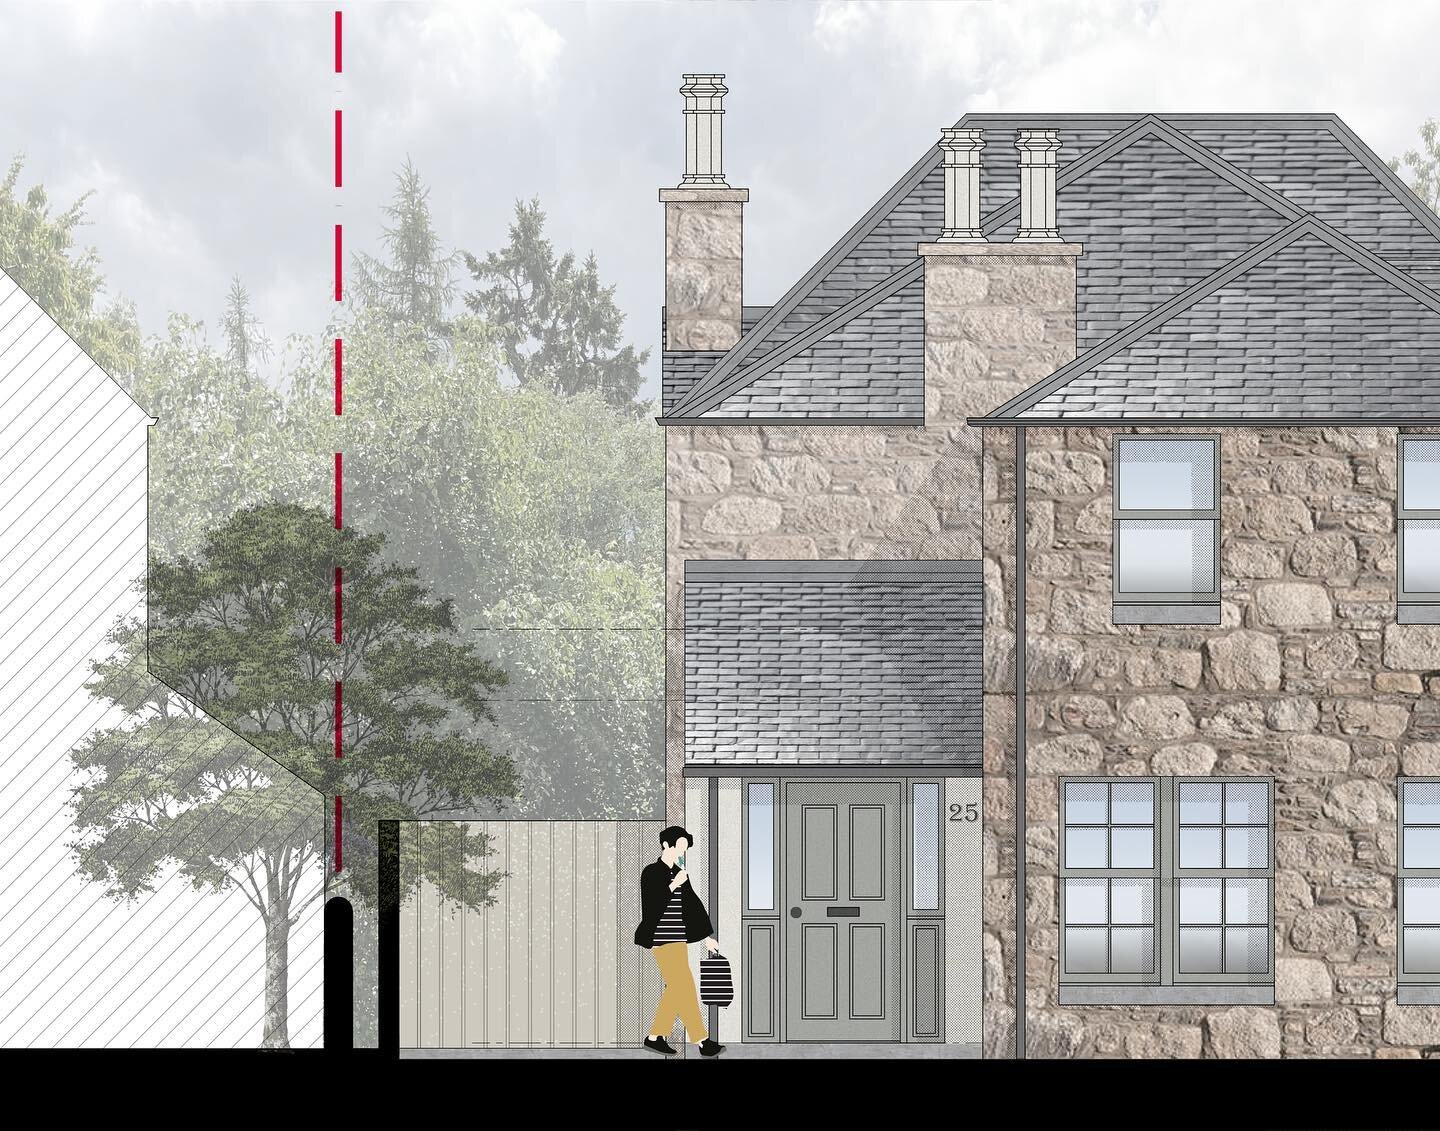 Planning Approved! Fantastic to have achieved Planning Approval for this sympathetic granite clad two storey extension to the rear of this beautiful home. #architecture #planningapproval #scottisharchitects #granite #aberdeen #homeimprovement